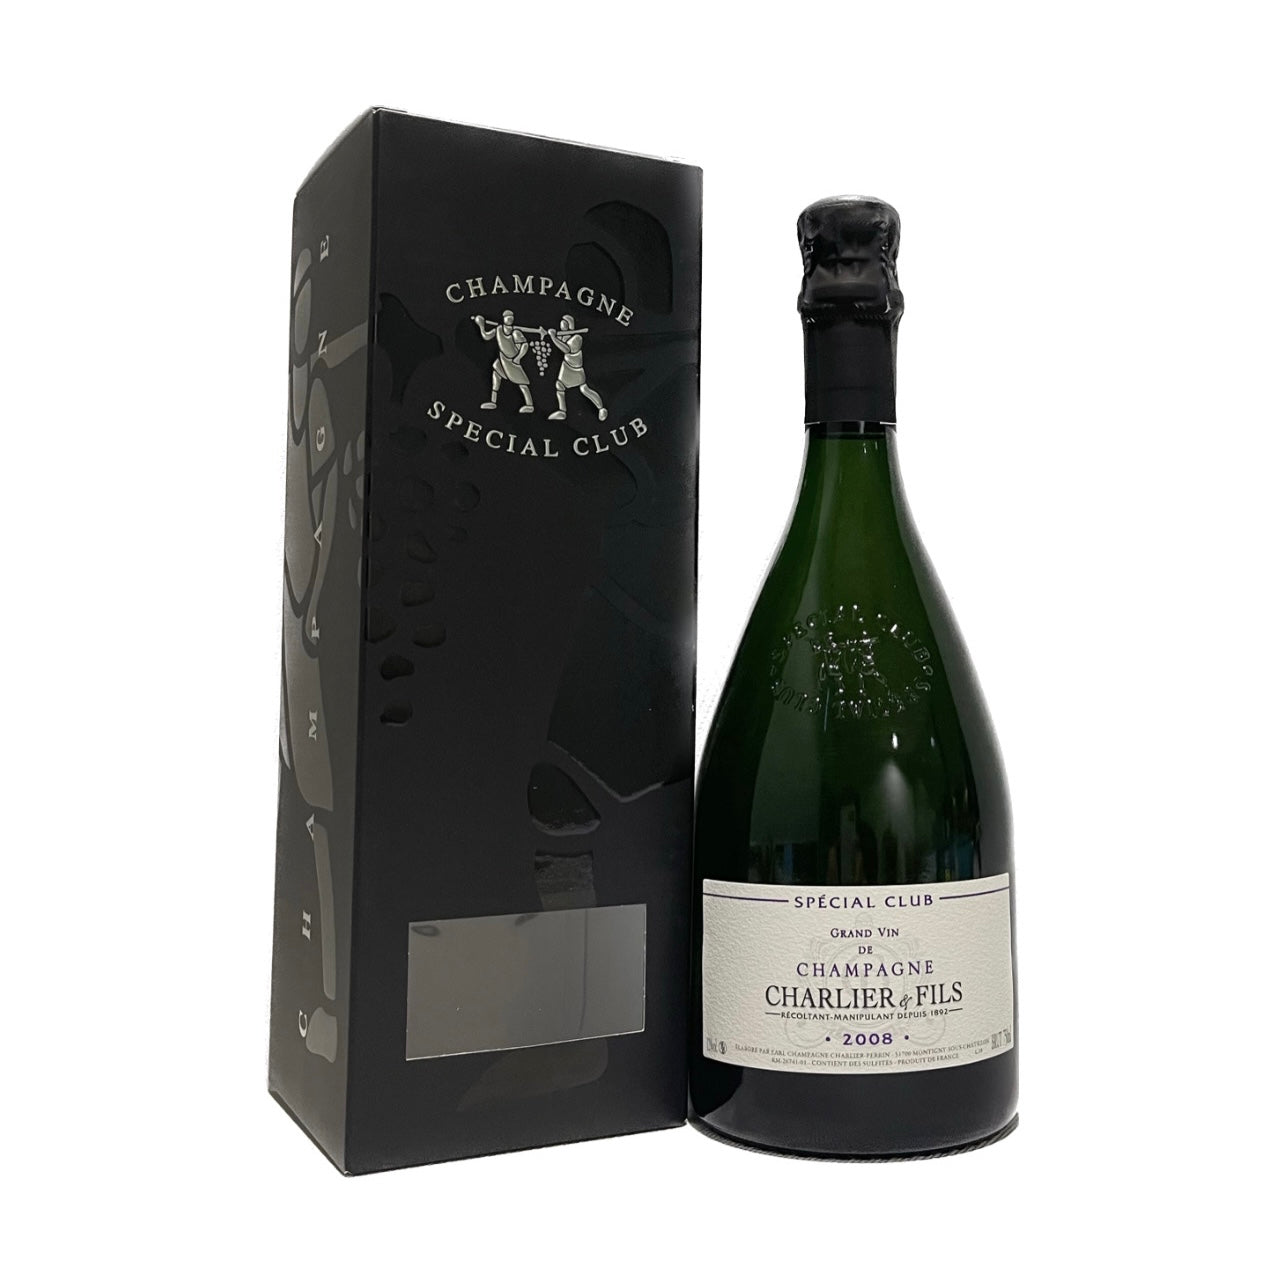 CHAMPAGNE BRUT "SPECIAL CLUB" 2008 - CHARLIER & FILS